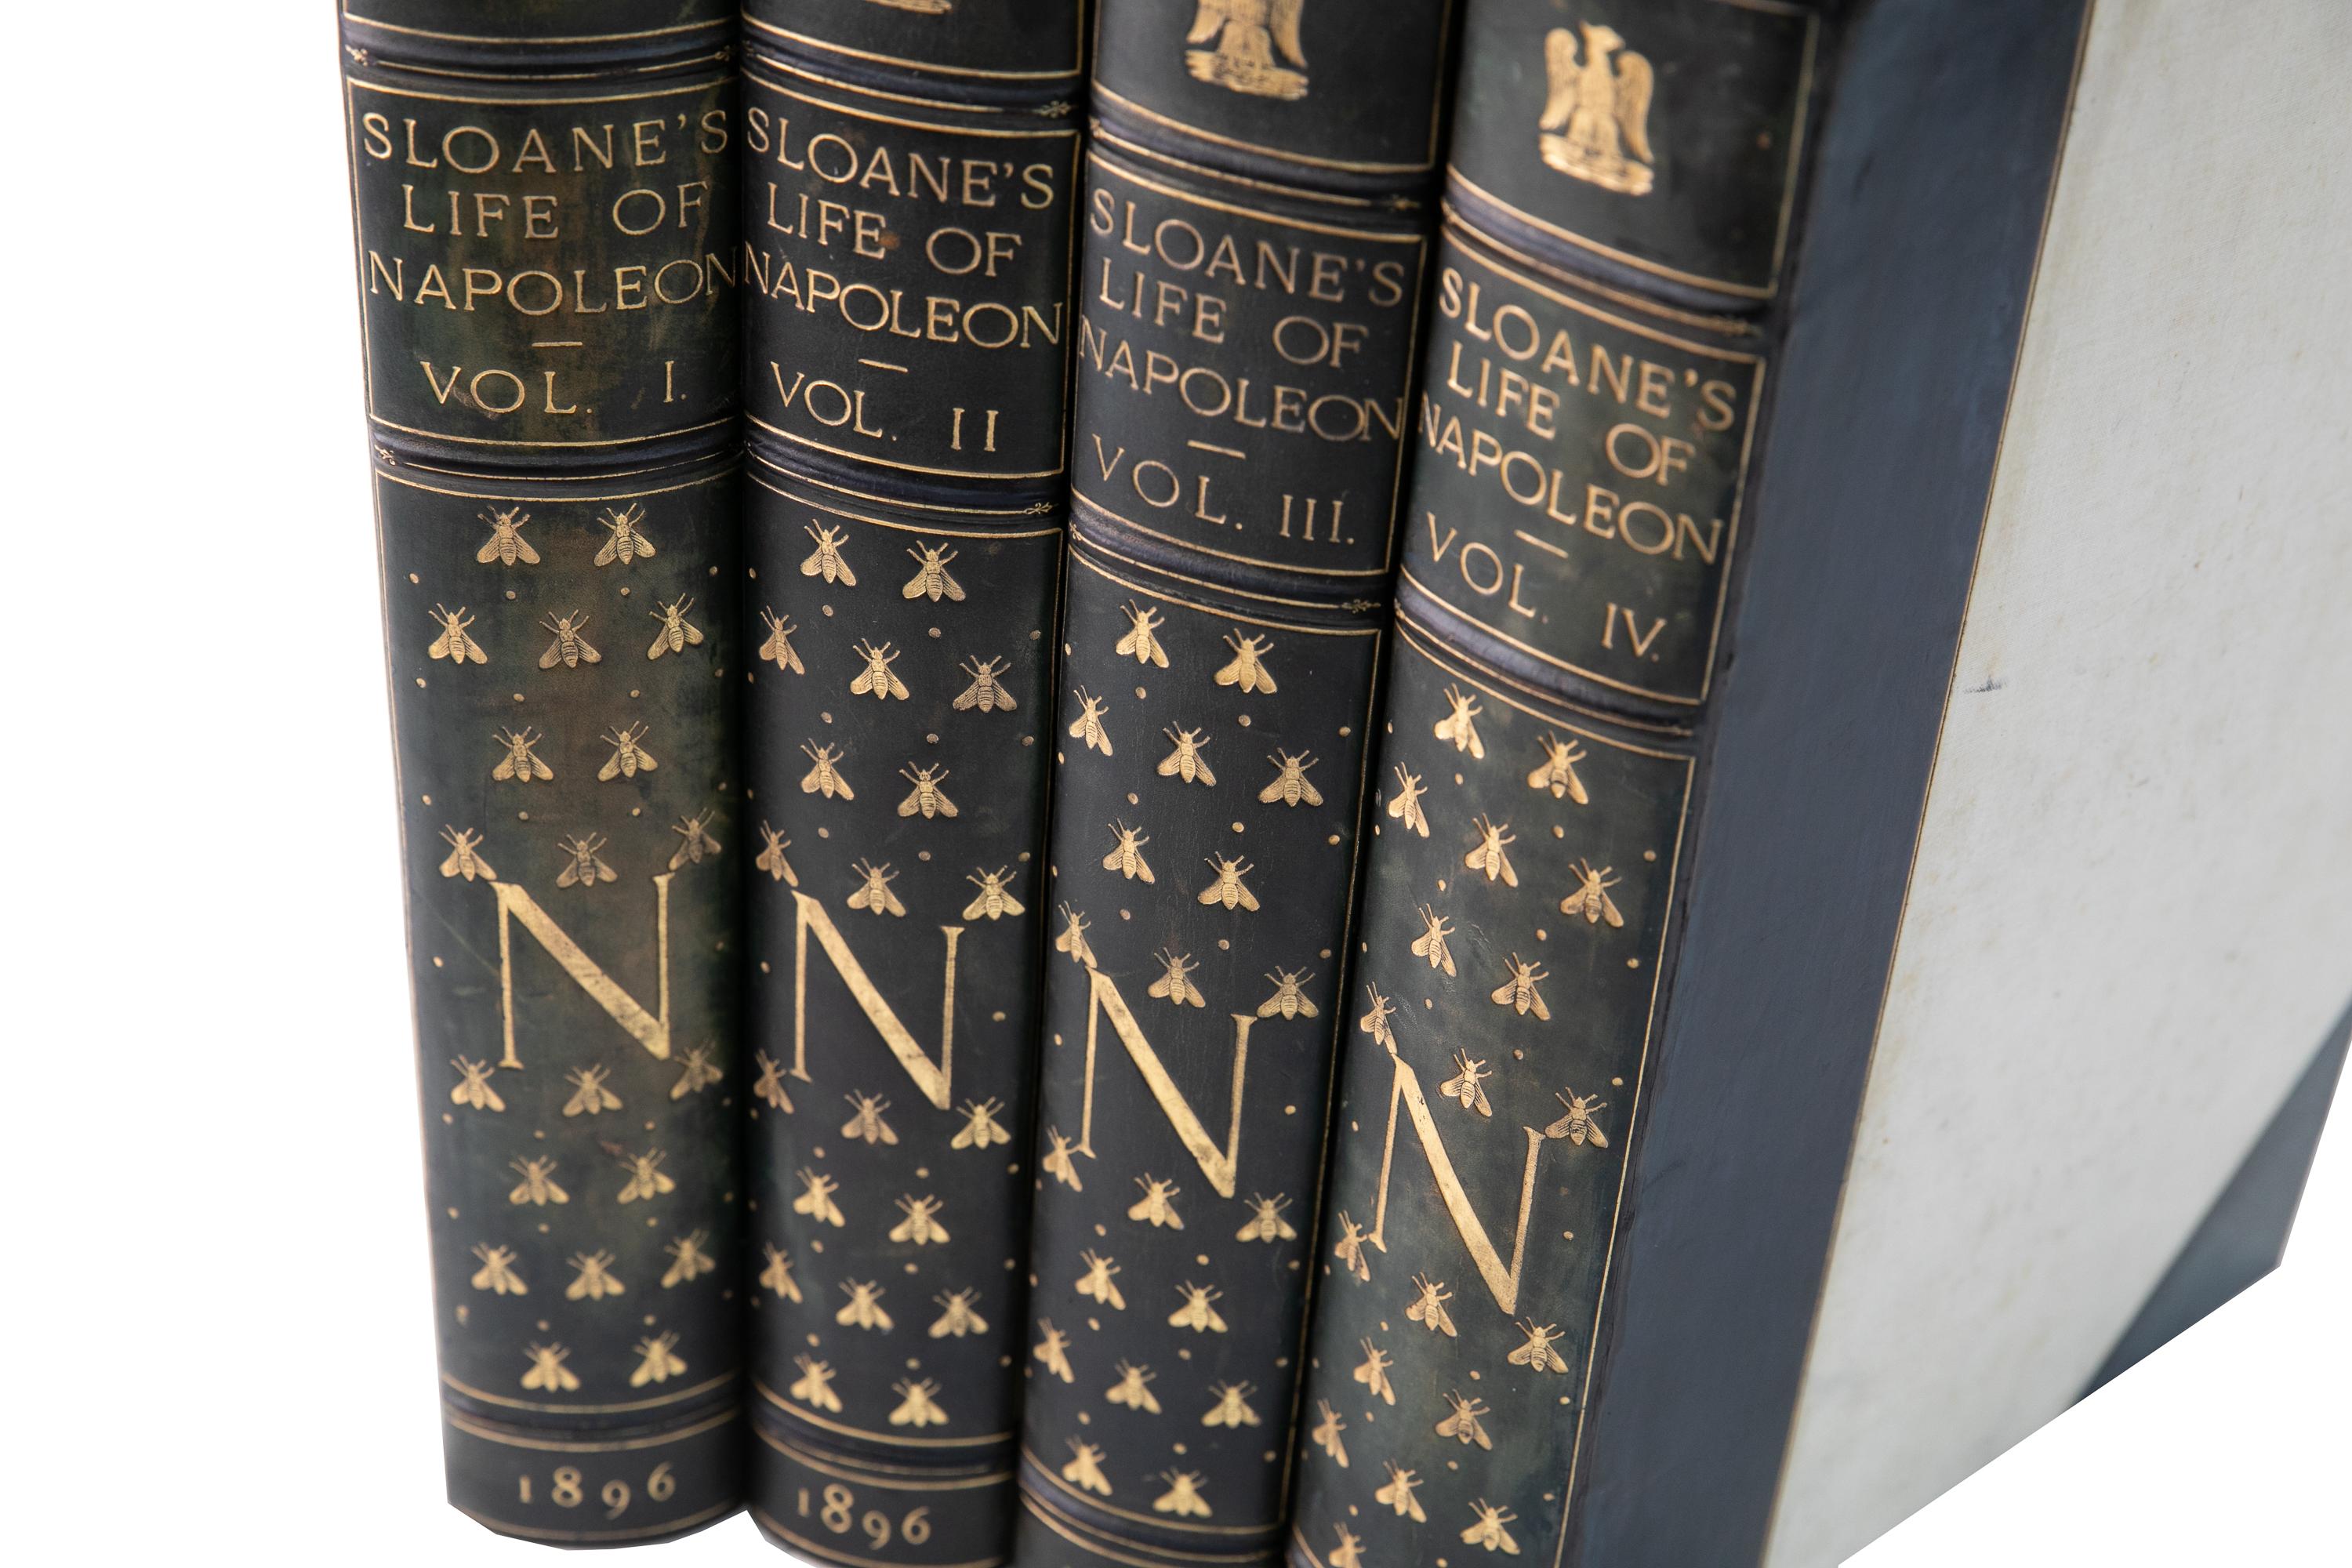 4 Volumes. William Milligan Sloane, The Life of Napoleon Bonaparte. First Edition. Bound in 3/4 blue calf and linen boards with the covers and raised band spines displaying gilt-tooled detailing. The top edges are gilt with marbled endpapers.